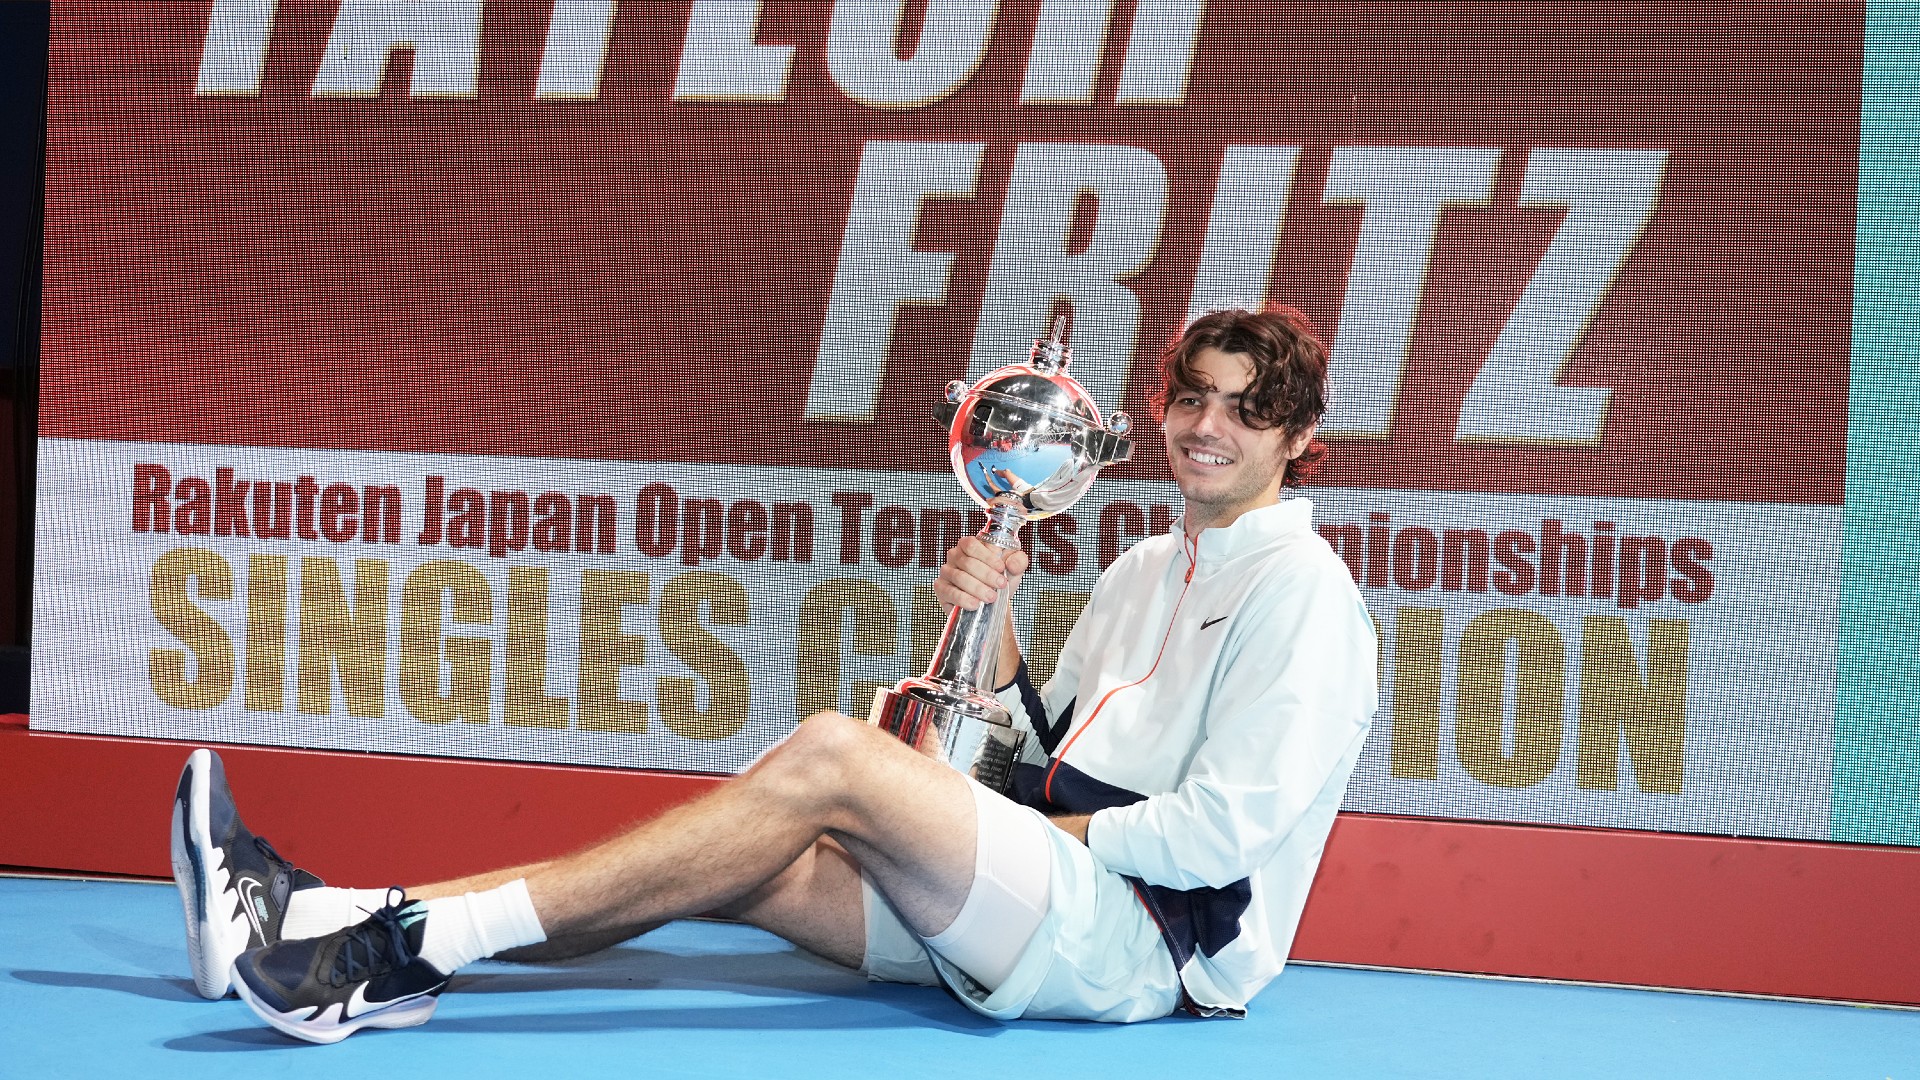 Fritz moves into top 10 with Japan Open triump beIN SPORTS